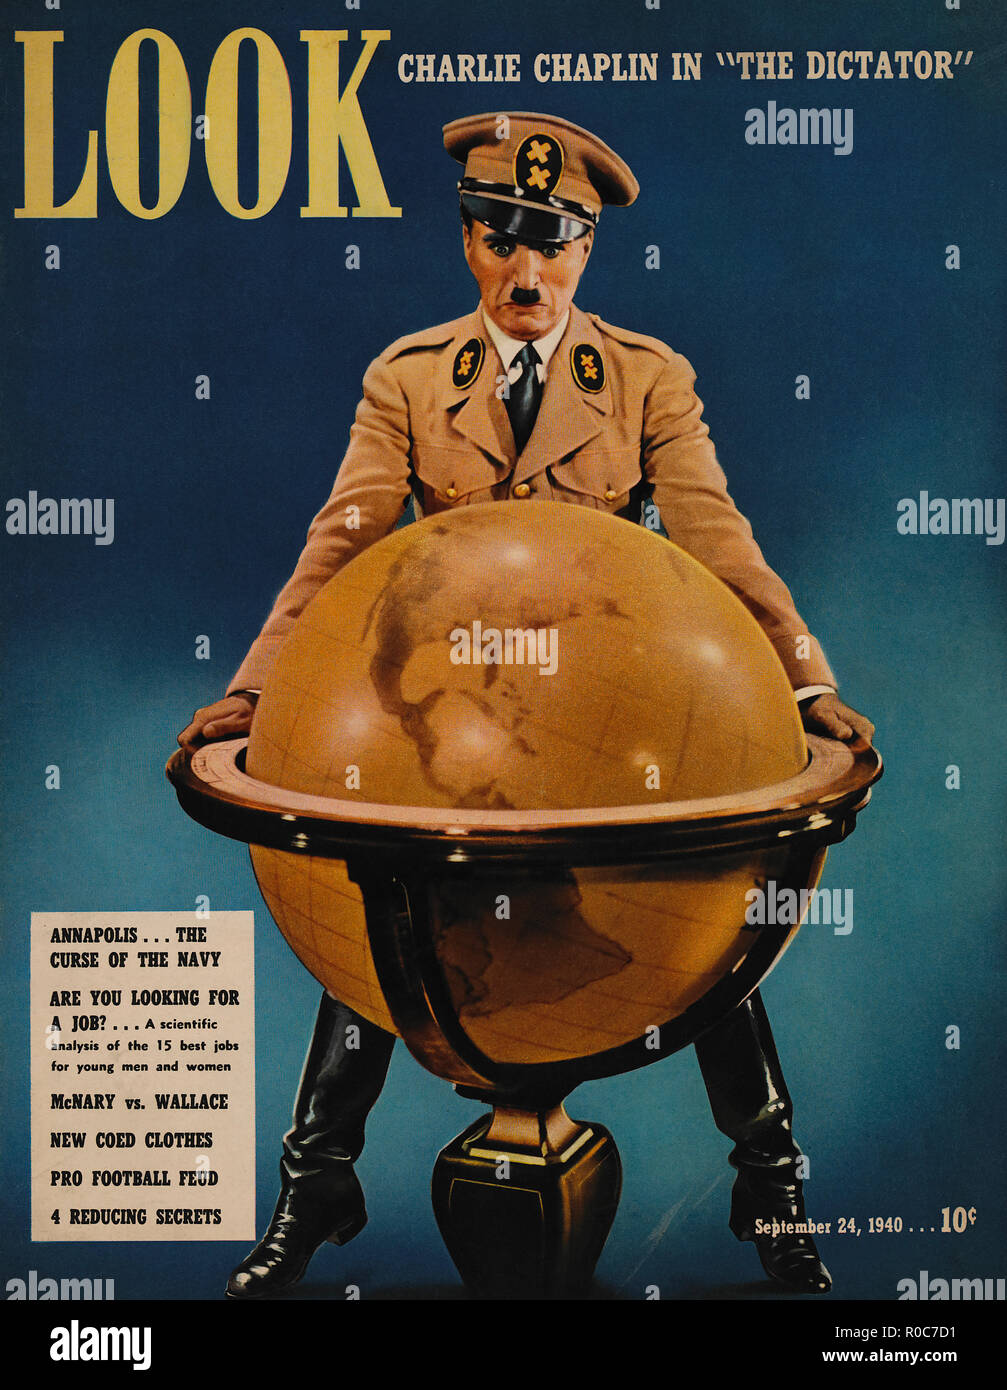 Actor Charlie Chaplin, as Adenoid Hynkel in 'The Dictator', Look Magazine Cover, September 24, 1940 Stock Photo